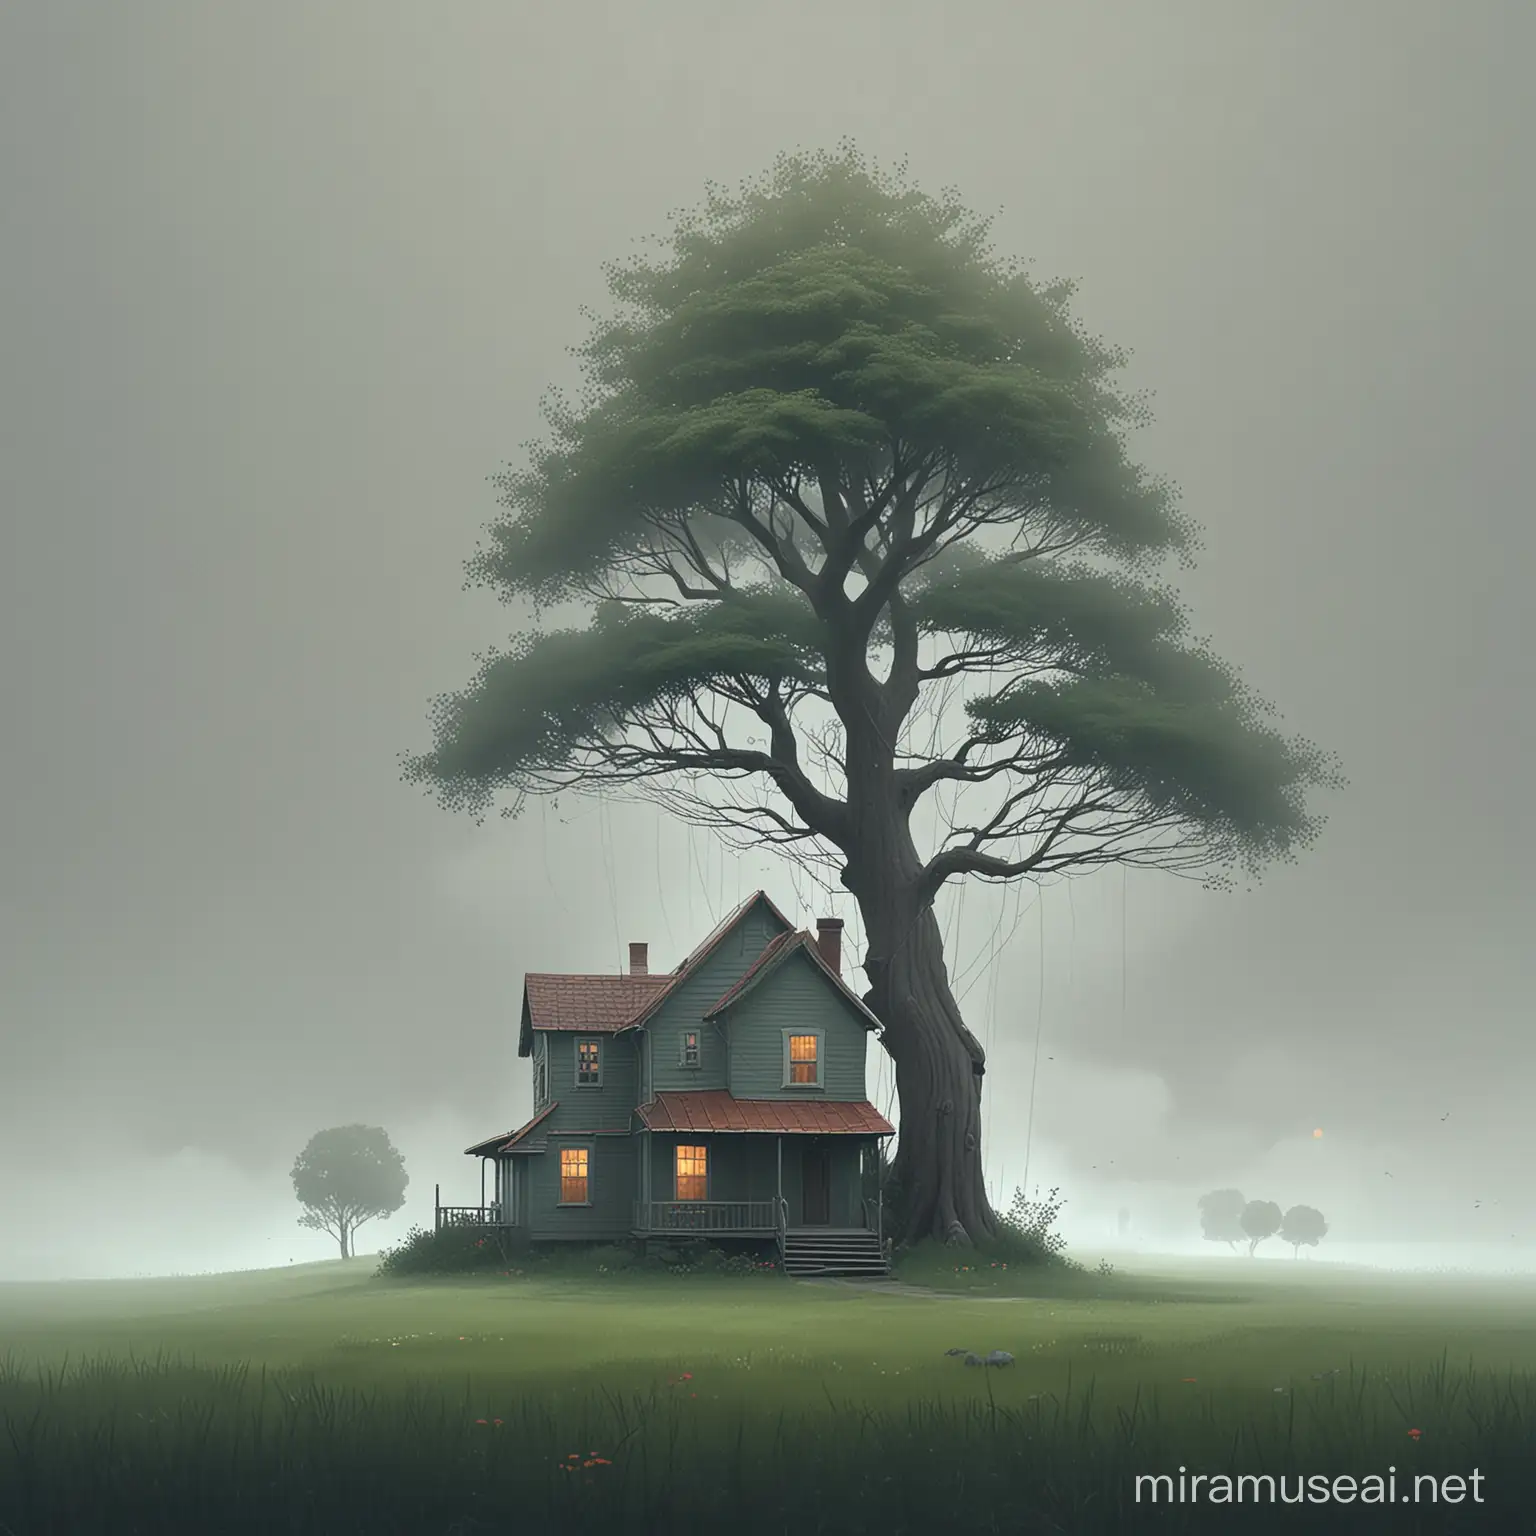 A house with the shape of a tree, concept art in the style of Goro Fujita and Oliver Jeffers, minimal background, foggy, weird, calm mood, simple. --ar 103:128